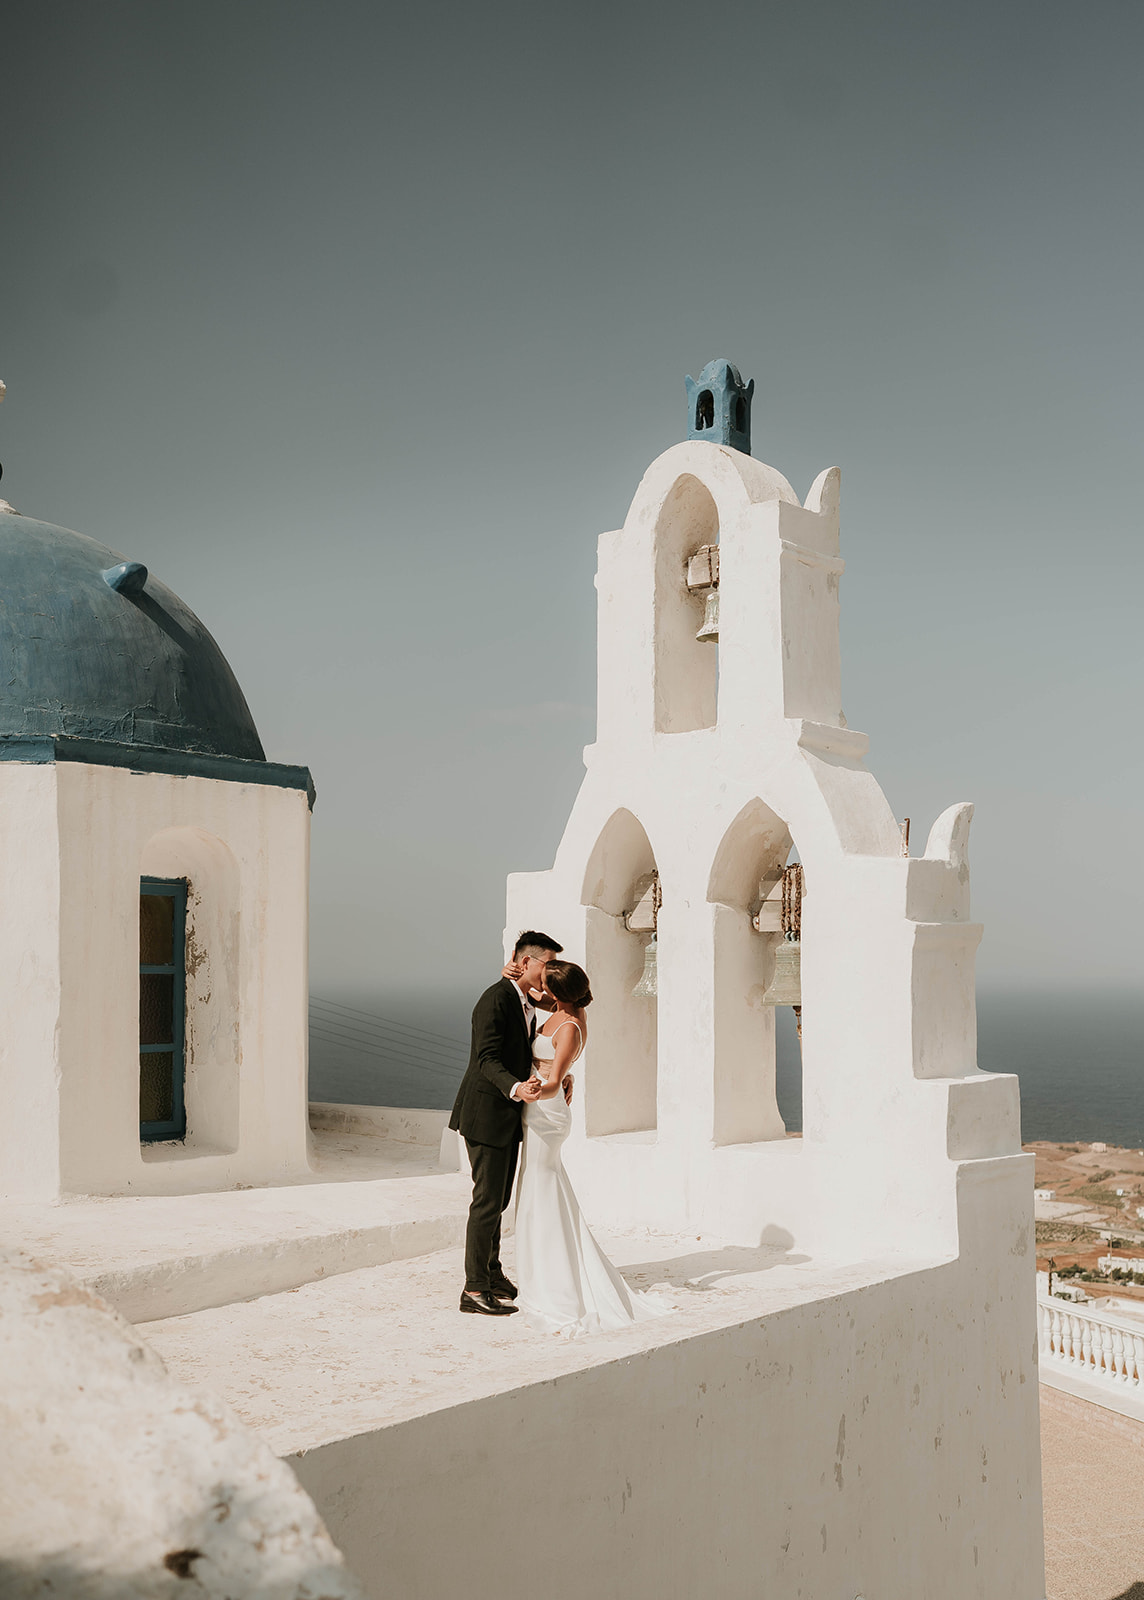  A couple who eloped in Santorini have their first dancing on church rooftop